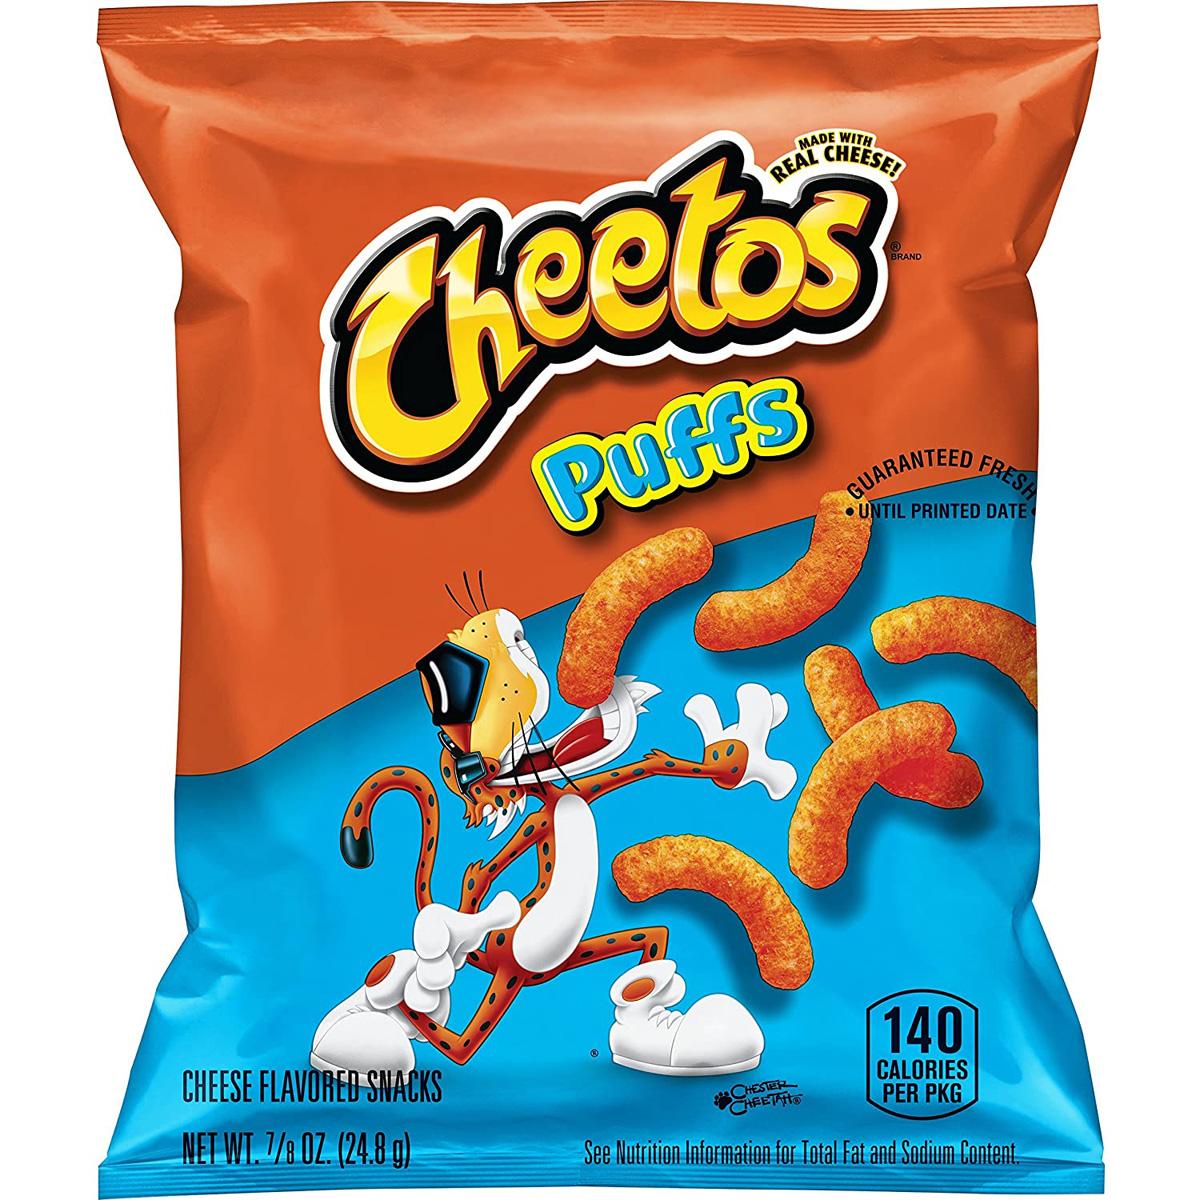 40 Cheetos Puffs Cheese Flavored Snacks for $9.67 Shipped